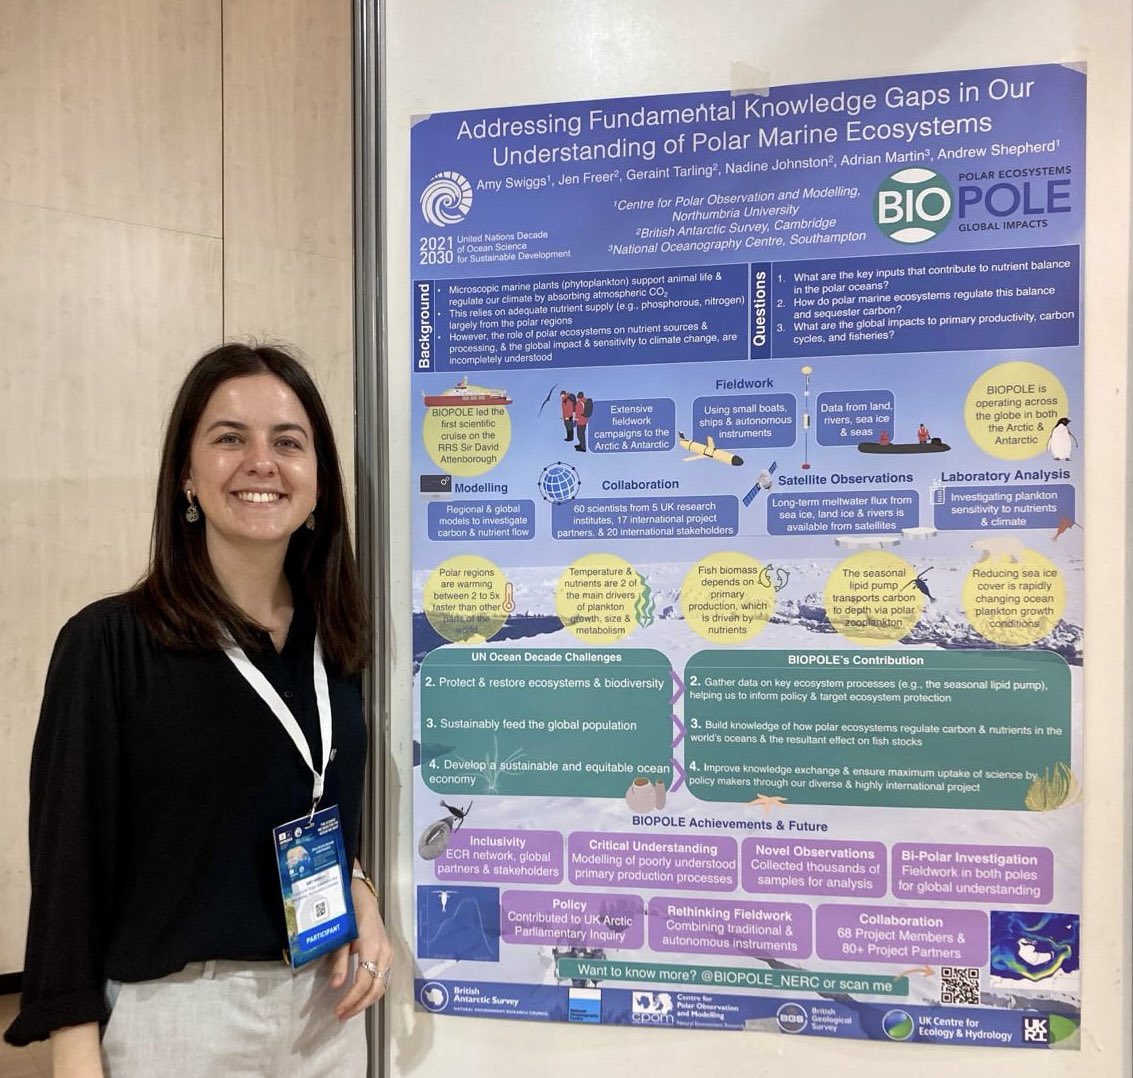 Come and find @BIOPOLE_NERC’s ECR @amy_swiggs at the @UNOceanDecade’s BIOPOLE Project showcasing all of our brilliant work!